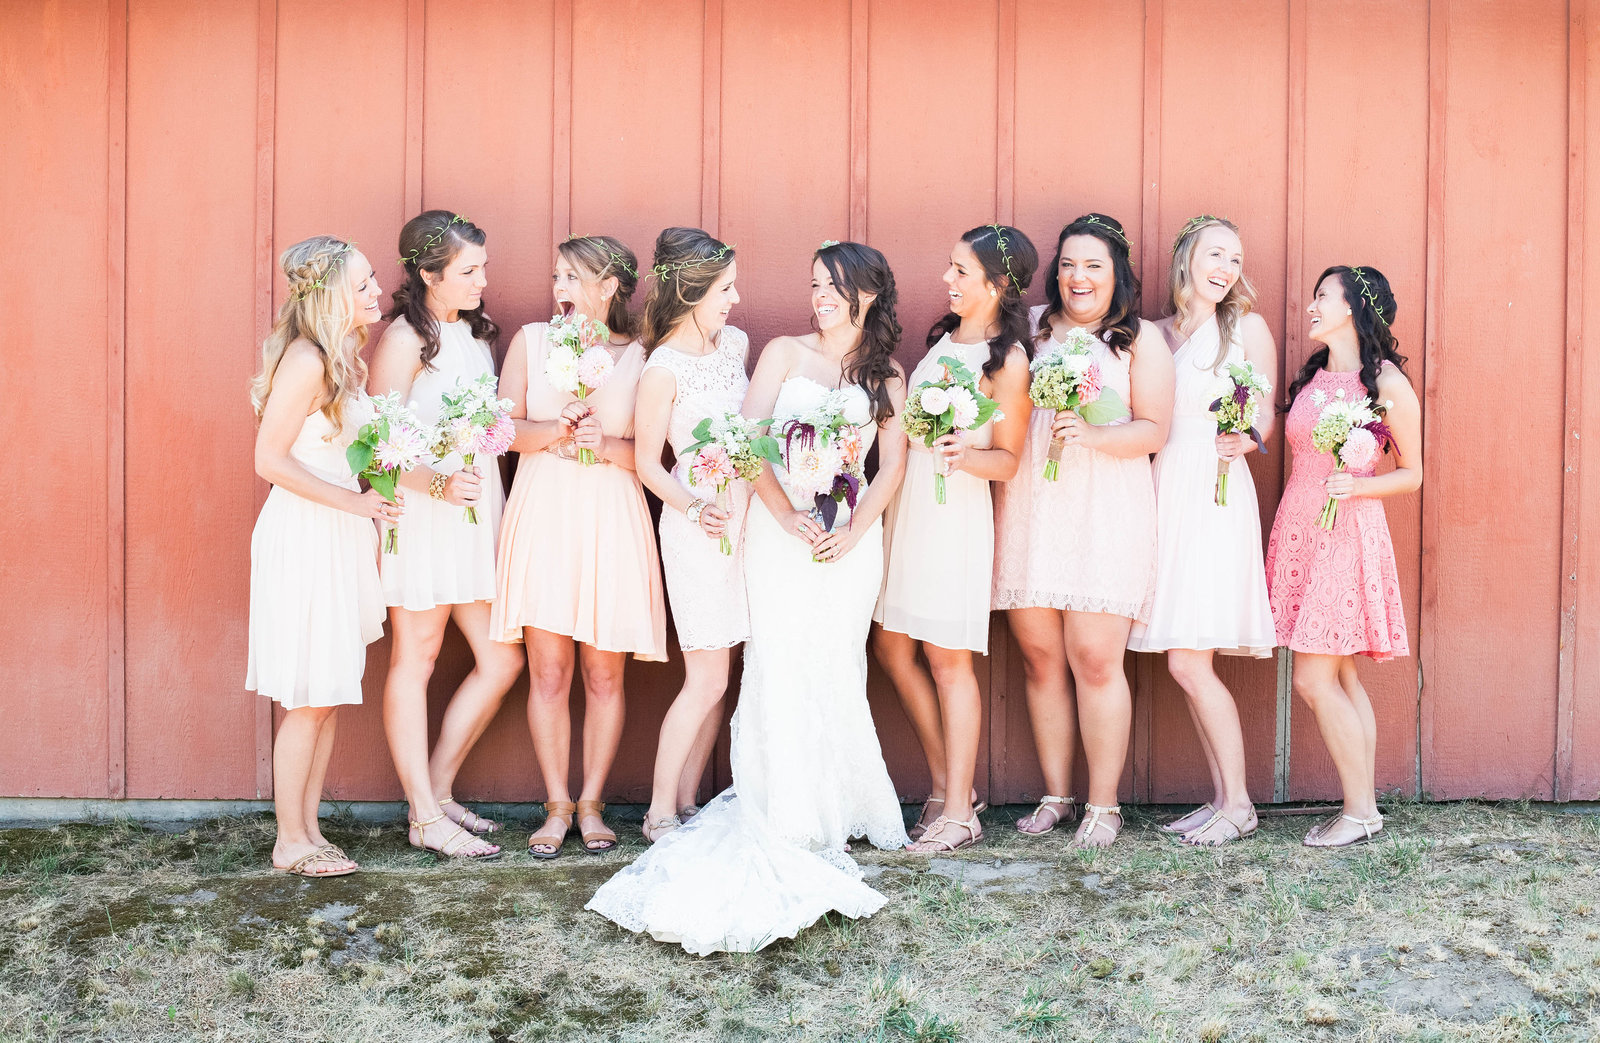 A bride and her bridesmaids.